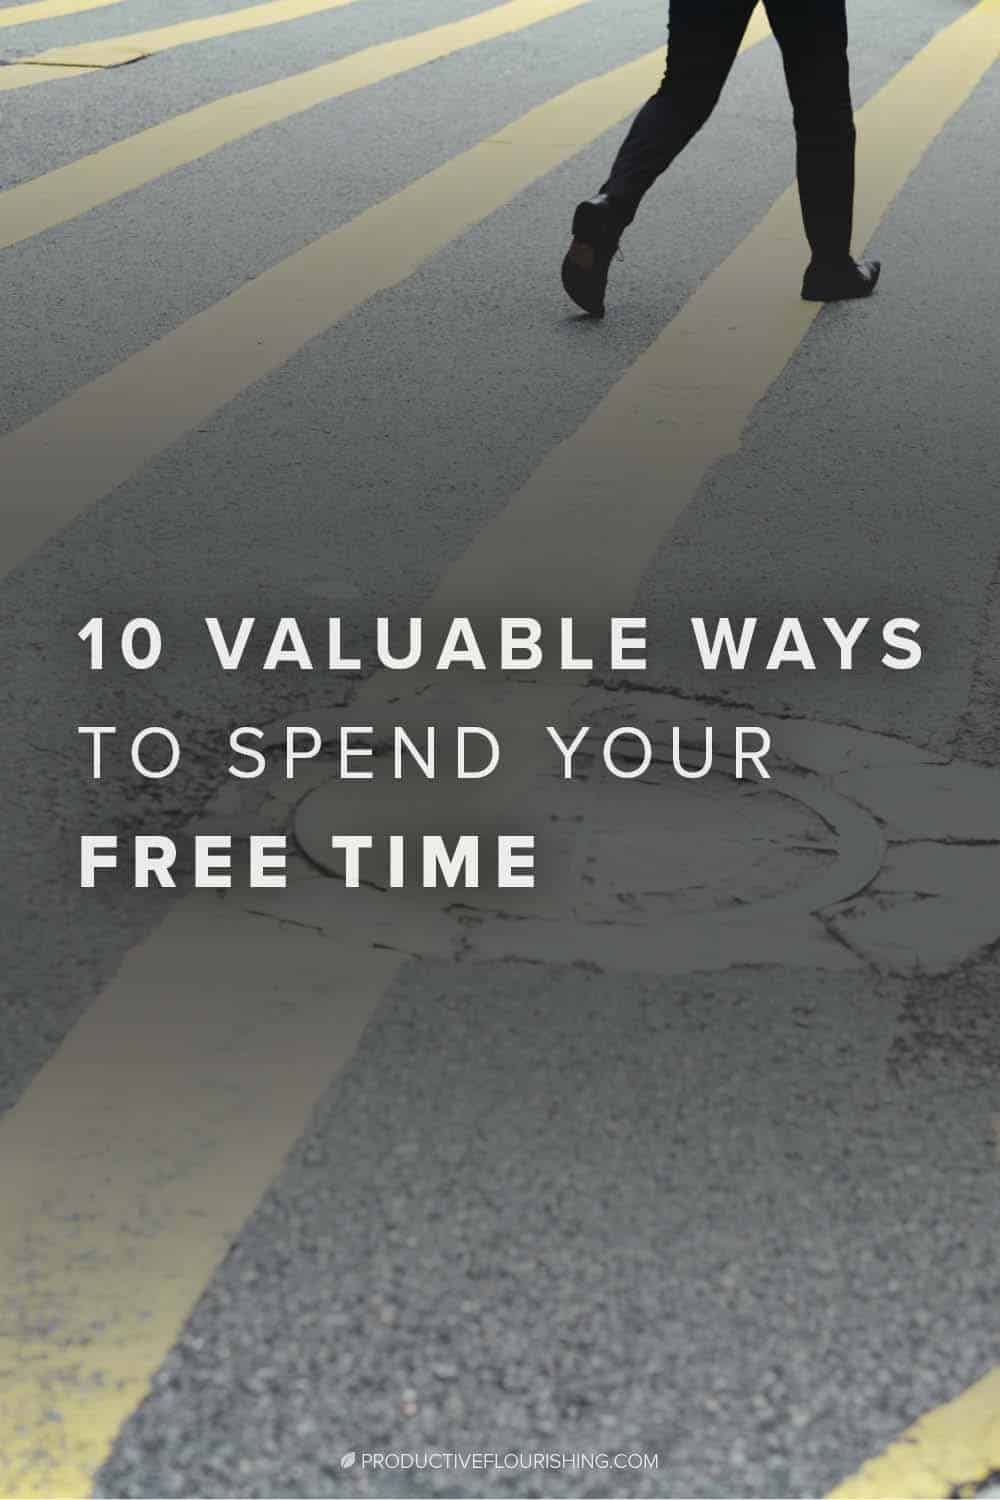 When we have ten spare minutes, we often flip to Facebook, investigate Instagram, or putter off to see if the coffee’s finished brewing. However, we might put our free time to better use, using them to energize our small business productivity levels or reach unrealized entrepreneurship goals. Here are 10 productive ways to spend 10 free minutes. #timemanagement #entrepreneurshipgoals #productiveflourishing